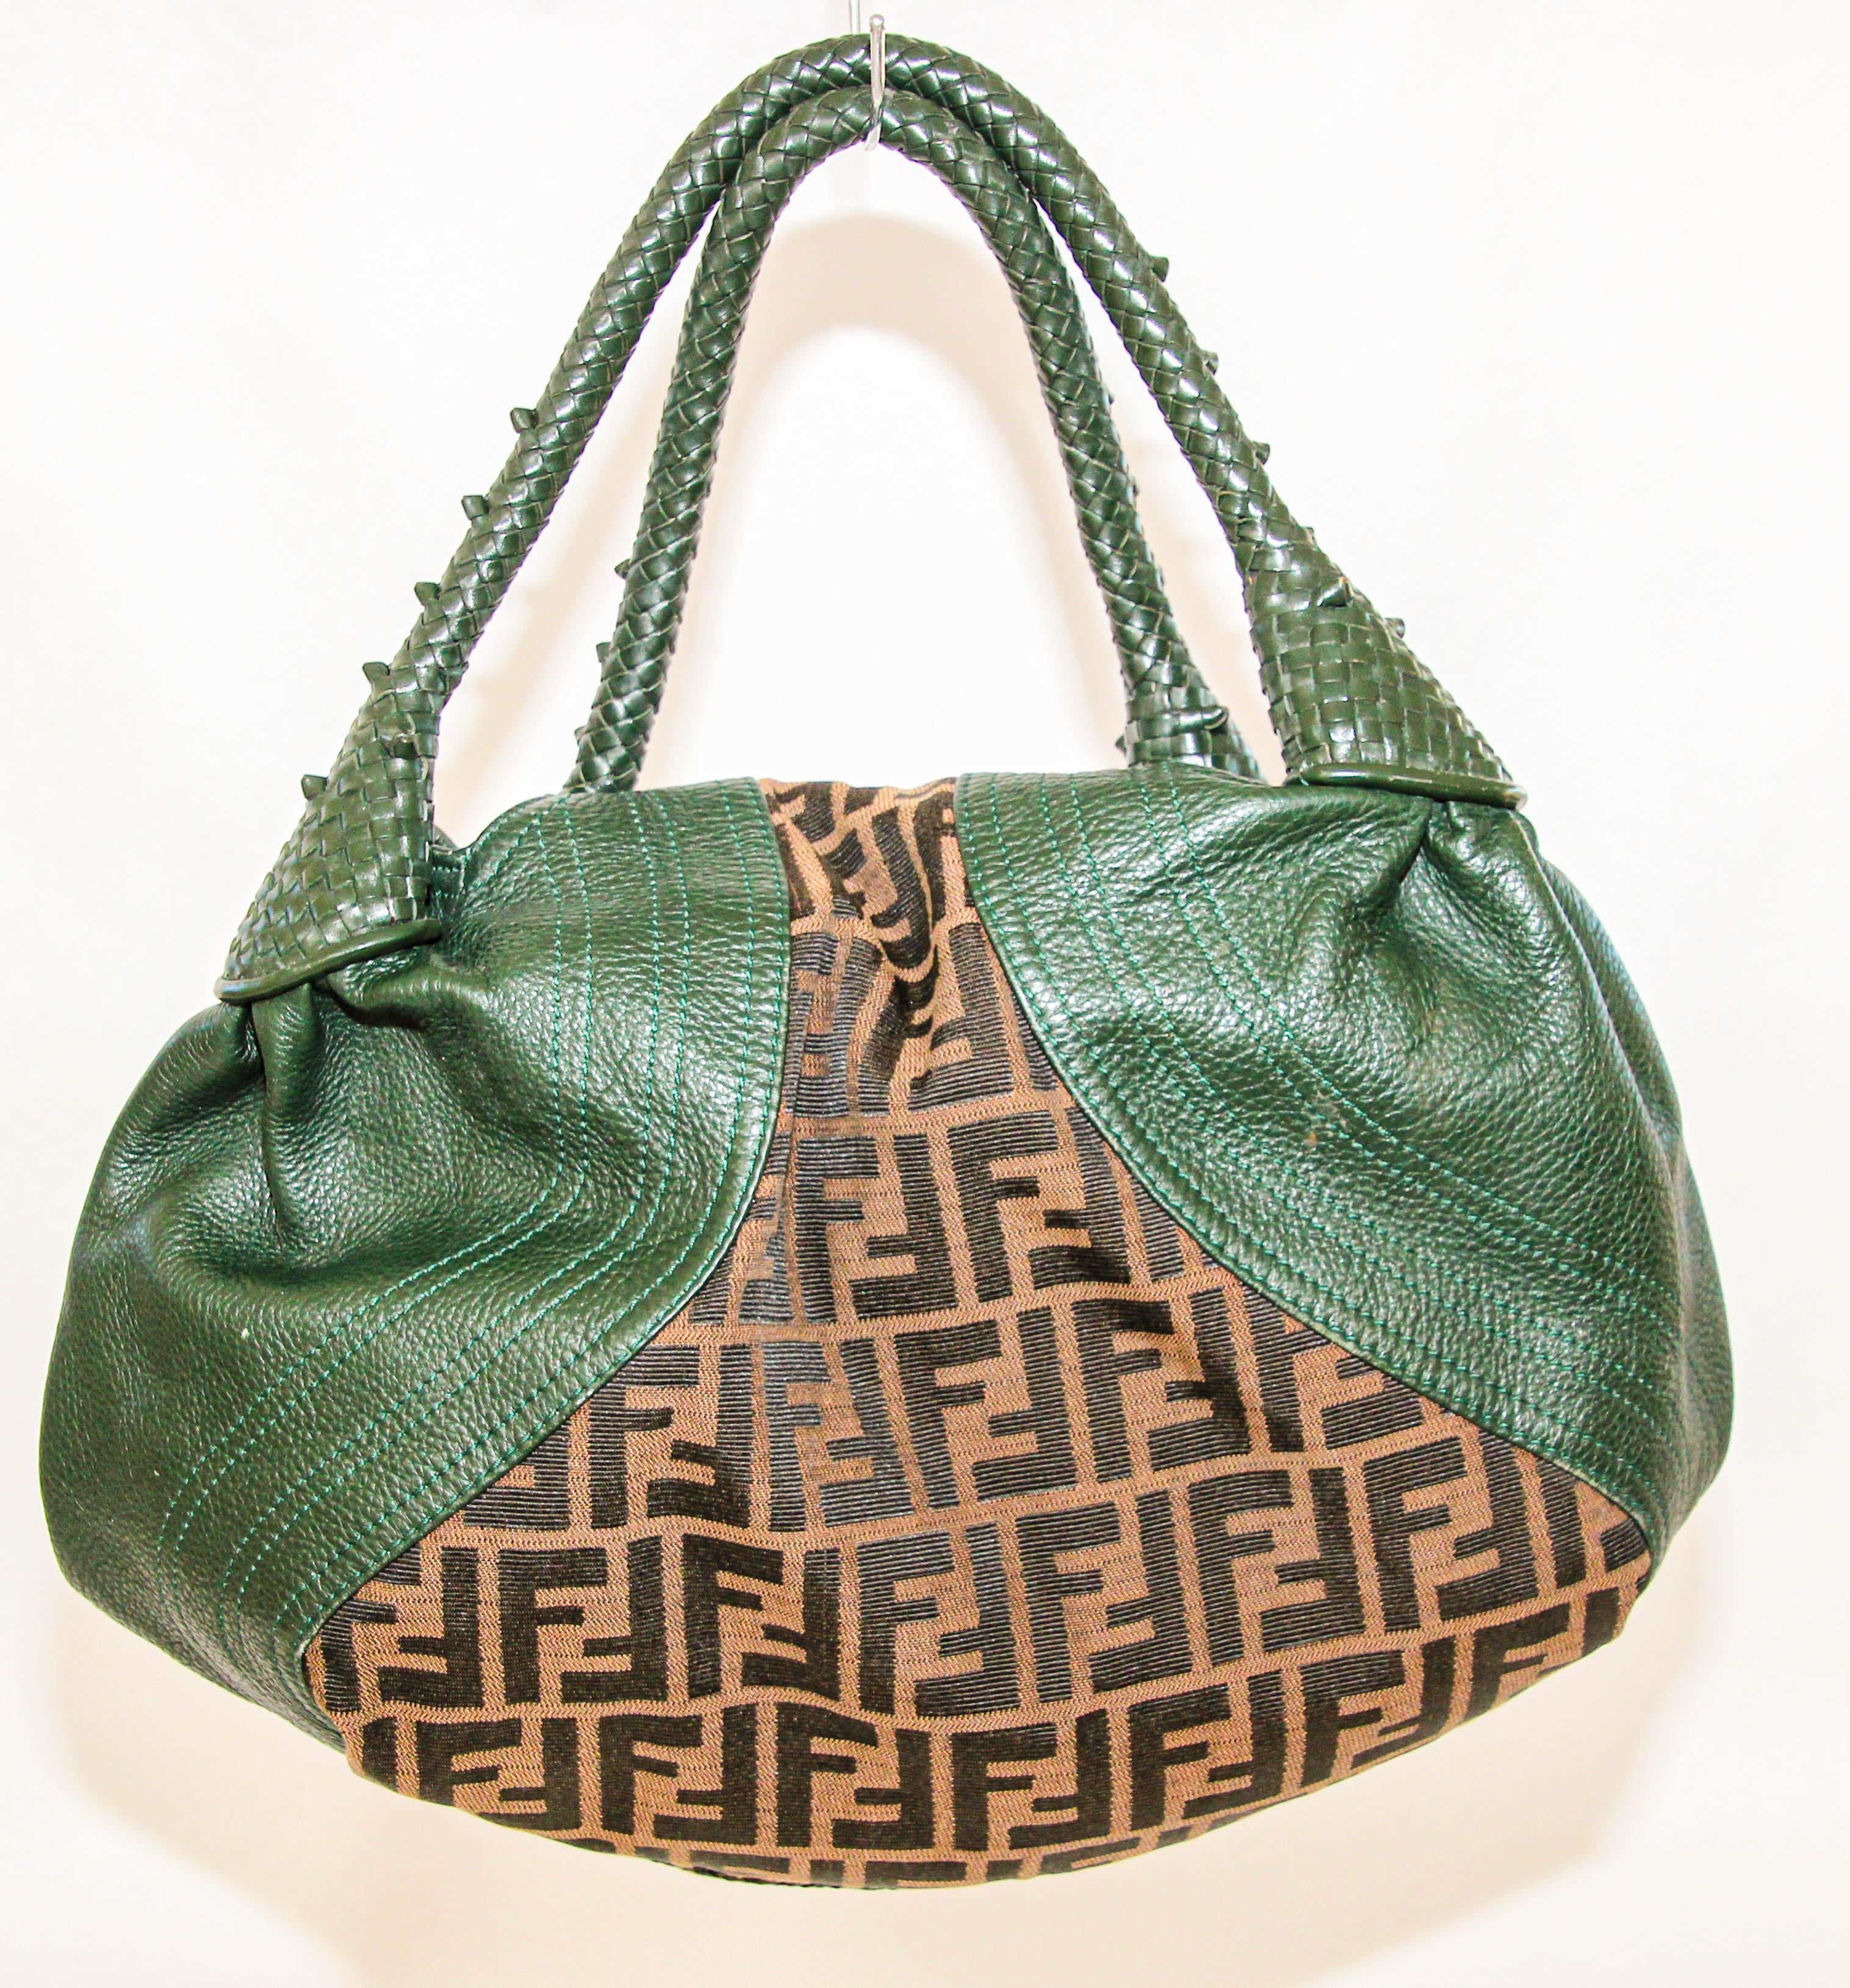 Fendi Green and Brown Zucca Canvas and Leather Large Spy Bag.
The Fendi Spy Bag is an Iconic 